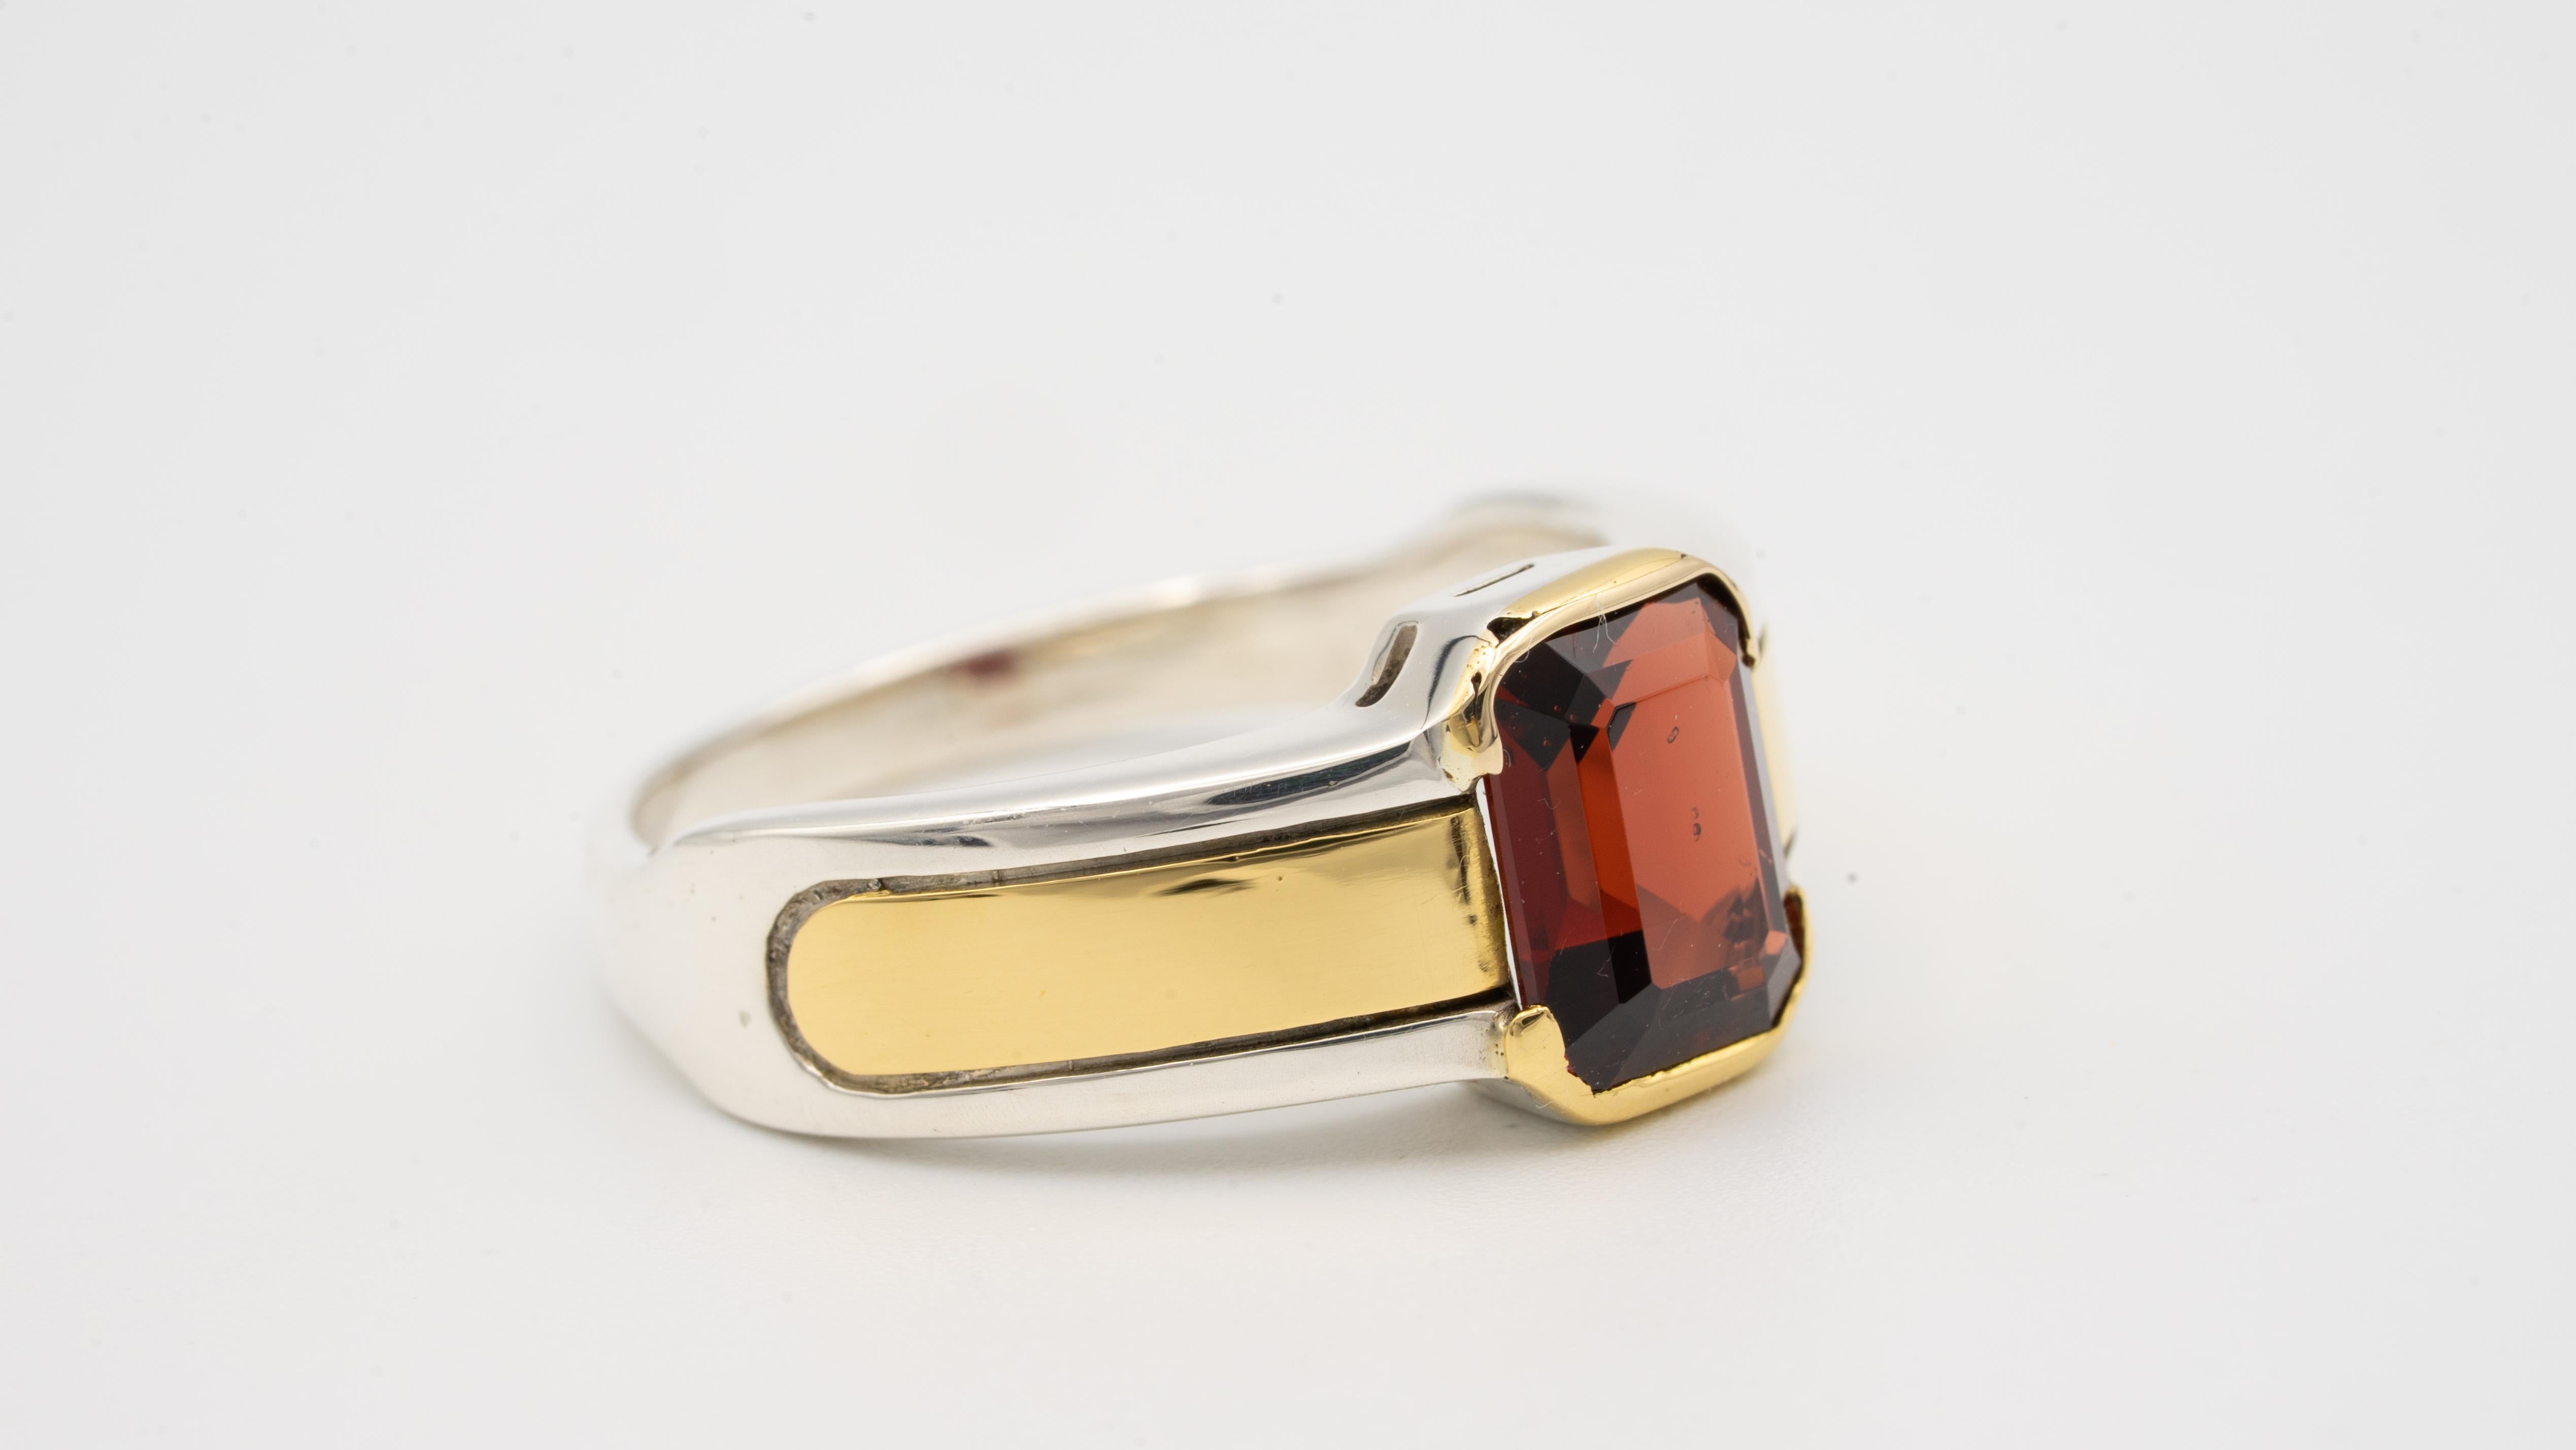 Cartier Ring finely crafted in Sterling Silver and 18 Karat yellow gold featuring an emerald cut Garnet in the center.
Garnet weighs 1.50 carats approximately. Garnet has a red lively color and is set in a thin half bezel.
Measurements: 5.78 mm at